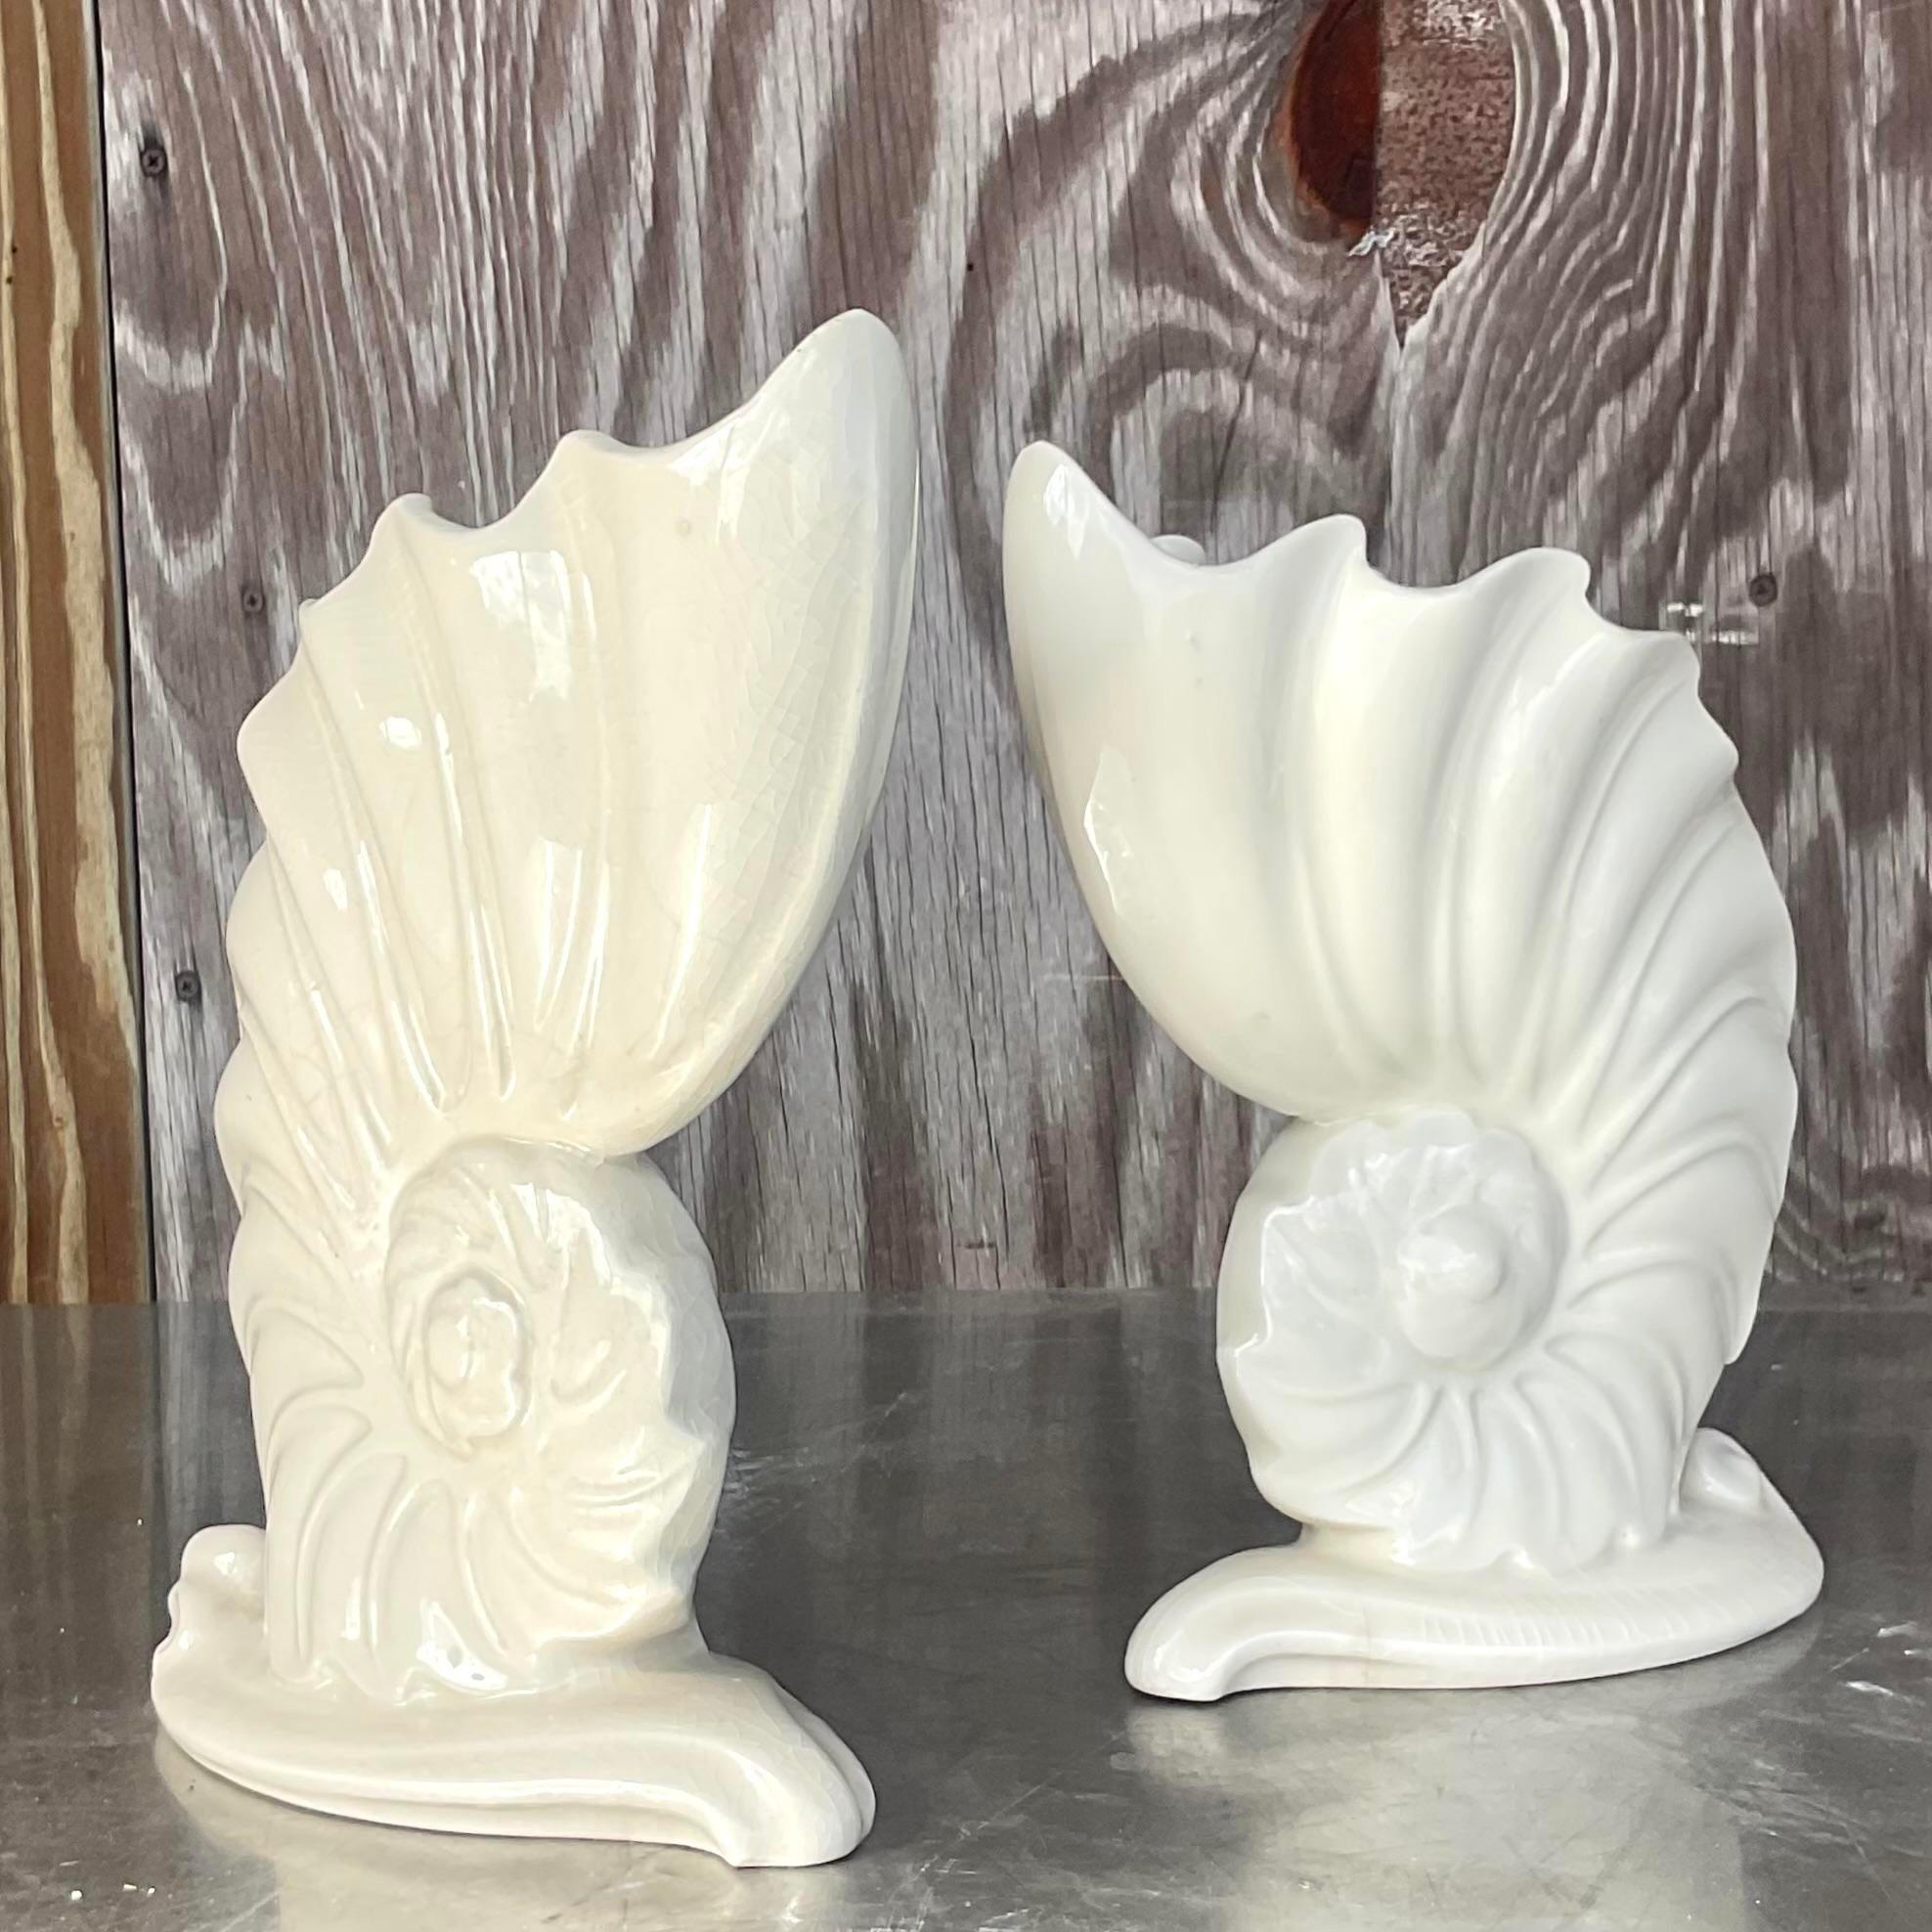 20th Century Vintage Coastal Abstract Nautilus Shell Glazed Ceramic Vases - a Pair For Sale